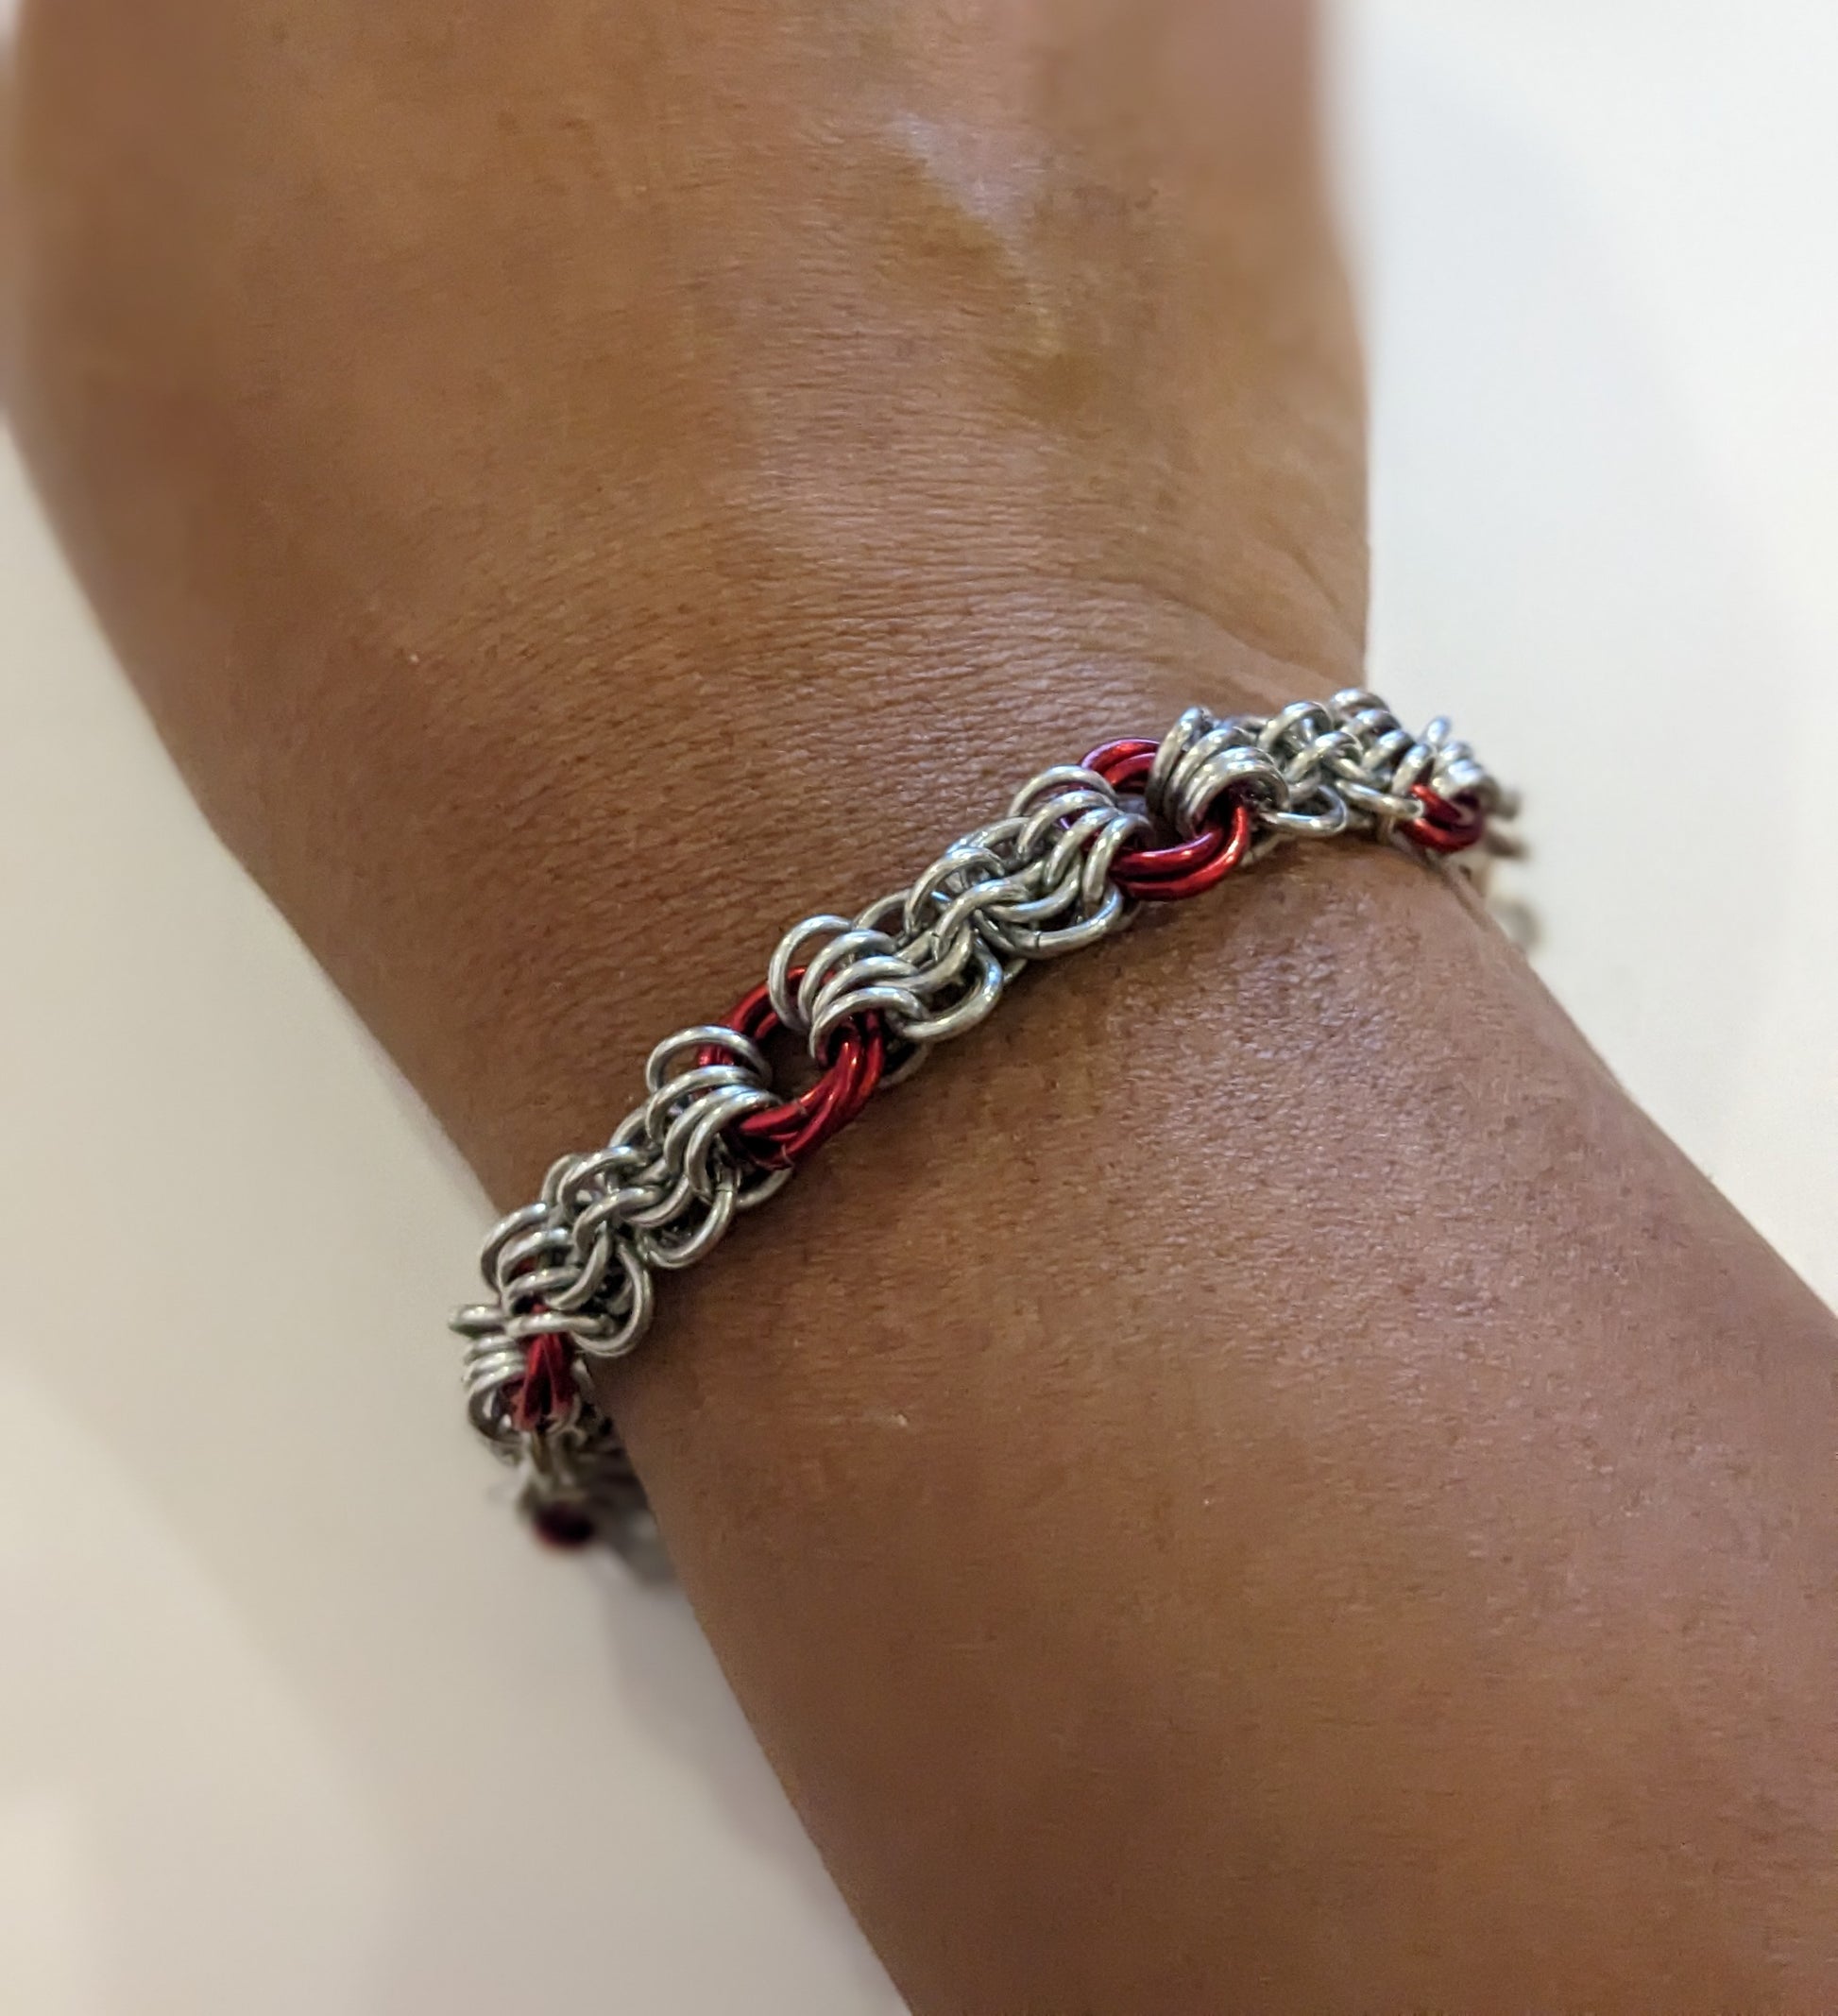 Silver and red butterfly weave chainmail bracelet on a brown wrist